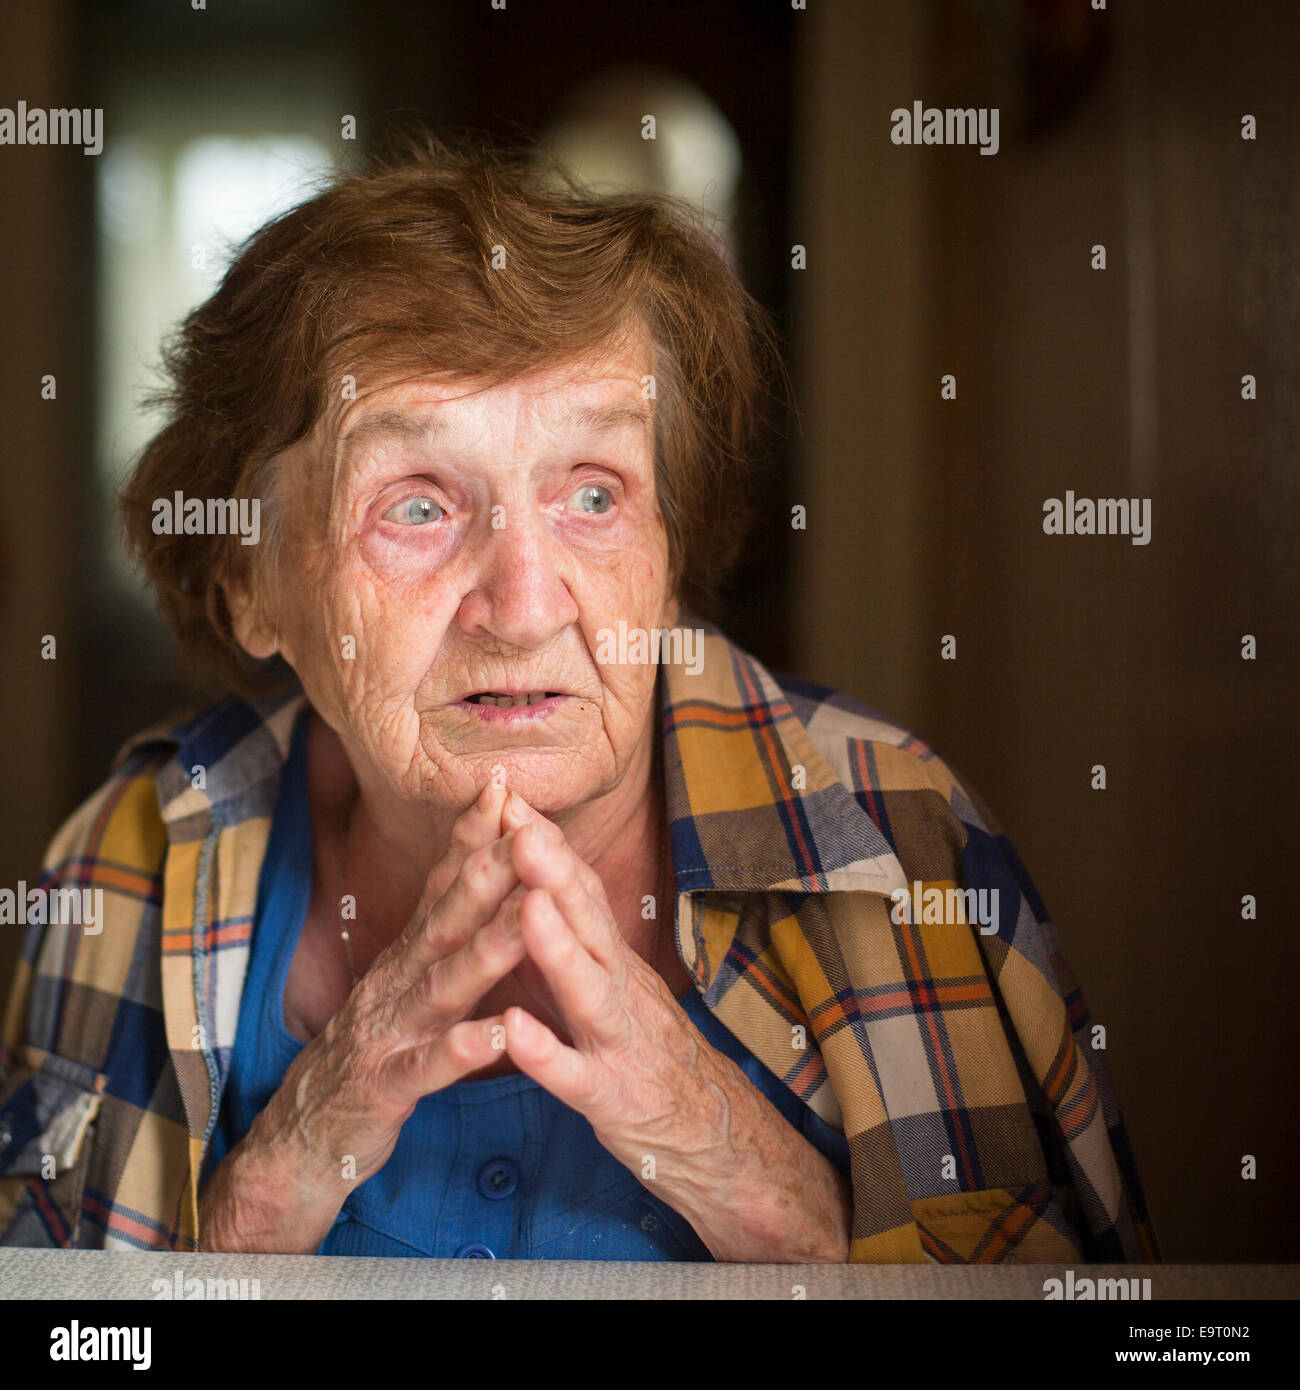 Old restless emotional woman during a conversation, close-up portrait. Stock Photo